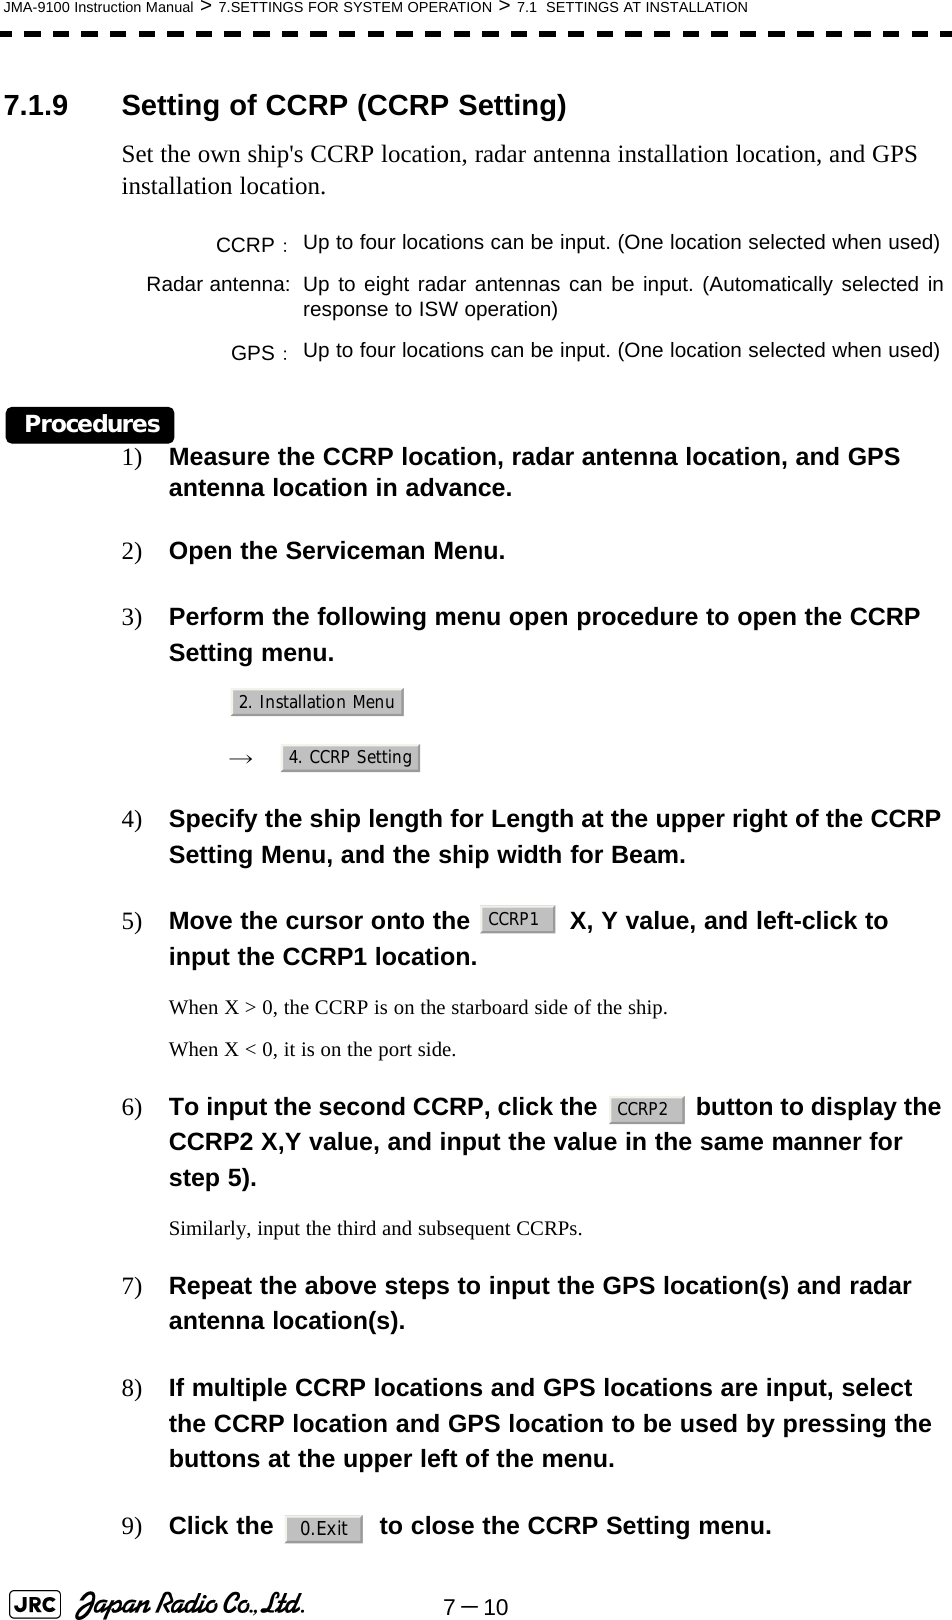 7－10JMA-9100 Instruction Manual &gt; 7.SETTINGS FOR SYSTEM OPERATION &gt; 7.1  SETTINGS AT INSTALLATION7.1.9 Setting of CCRP (CCRP Setting)Set the own ship&apos;s CCRP location, radar antenna installation location, and GPS installation location.Procedures1) Measure the CCRP location, radar antenna location, and GPS antenna location in advance.2) Open the Serviceman Menu.3) Perform the following menu open procedure to open the CCRP Setting menu.　　 →　4) Specify the ship length for Length at the upper right of the CCRP Setting Menu, and the ship width for Beam.5) Move the cursor onto the   X, Y value, and left-click to input the CCRP1 location.When X &gt; 0, the CCRP is on the starboard side of the ship.When X &lt; 0, it is on the port side.6) To input the second CCRP, click the   button to display the CCRP2 X,Y value, and input the value in the same manner for step 5).Similarly, input the third and subsequent CCRPs.7) Repeat the above steps to input the GPS location(s) and radar antenna location(s).8) If multiple CCRP locations and GPS locations are input, select the CCRP location and GPS location to be used by pressing the buttons at the upper left of the menu.9) Click the   to close the CCRP Setting menu.CCRP：Up to four locations can be input. (One location selected when used)Radar antenna: Up to eight radar antennas can be input. (Automatically selected inresponse to ISW operation)GPS：Up to four locations can be input. (One location selected when used)2. Installation Menu4. CCRP SettingCCRP1CCRP20.Exit